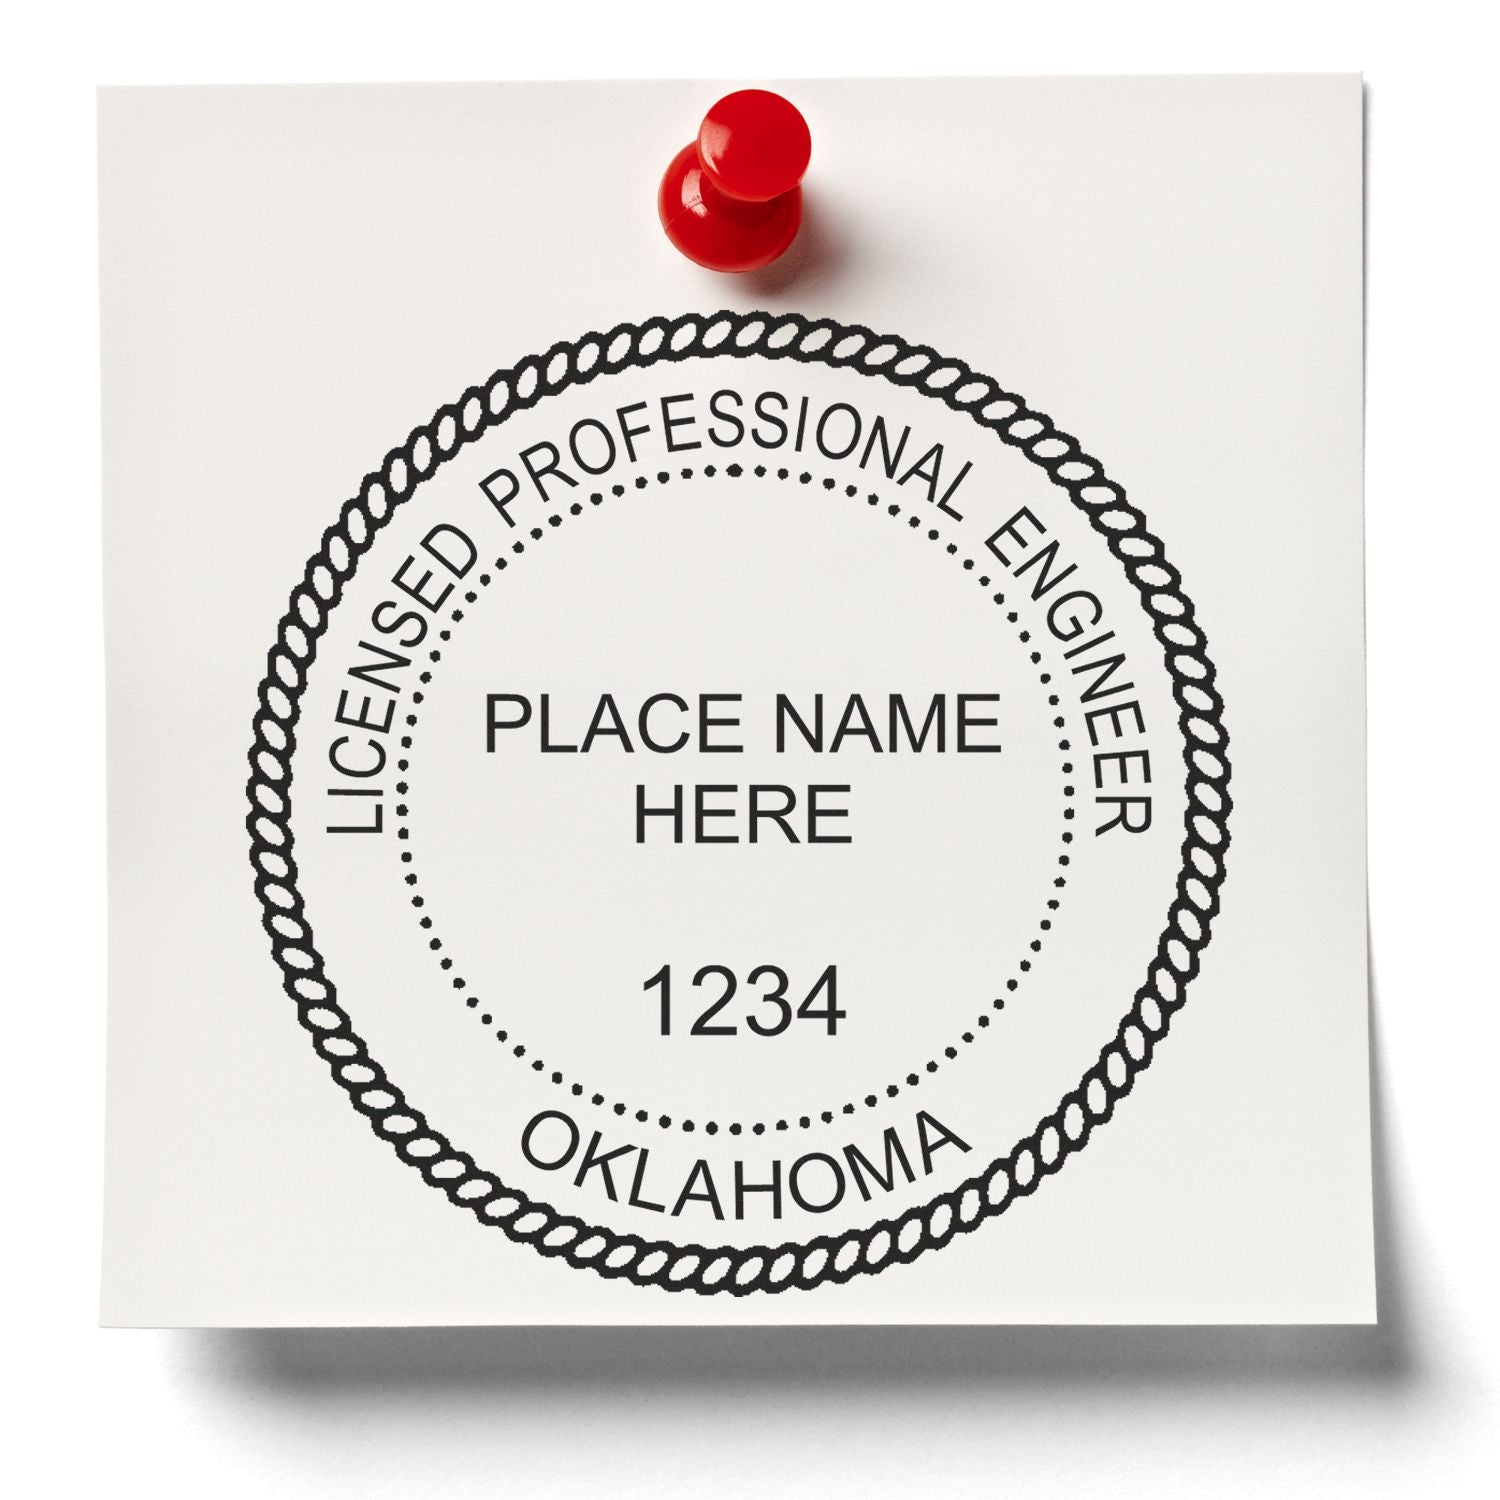 The main image for the Digital Oklahoma PE Stamp and Electronic Seal for Oklahoma Engineer depicting a sample of the imprint and electronic files